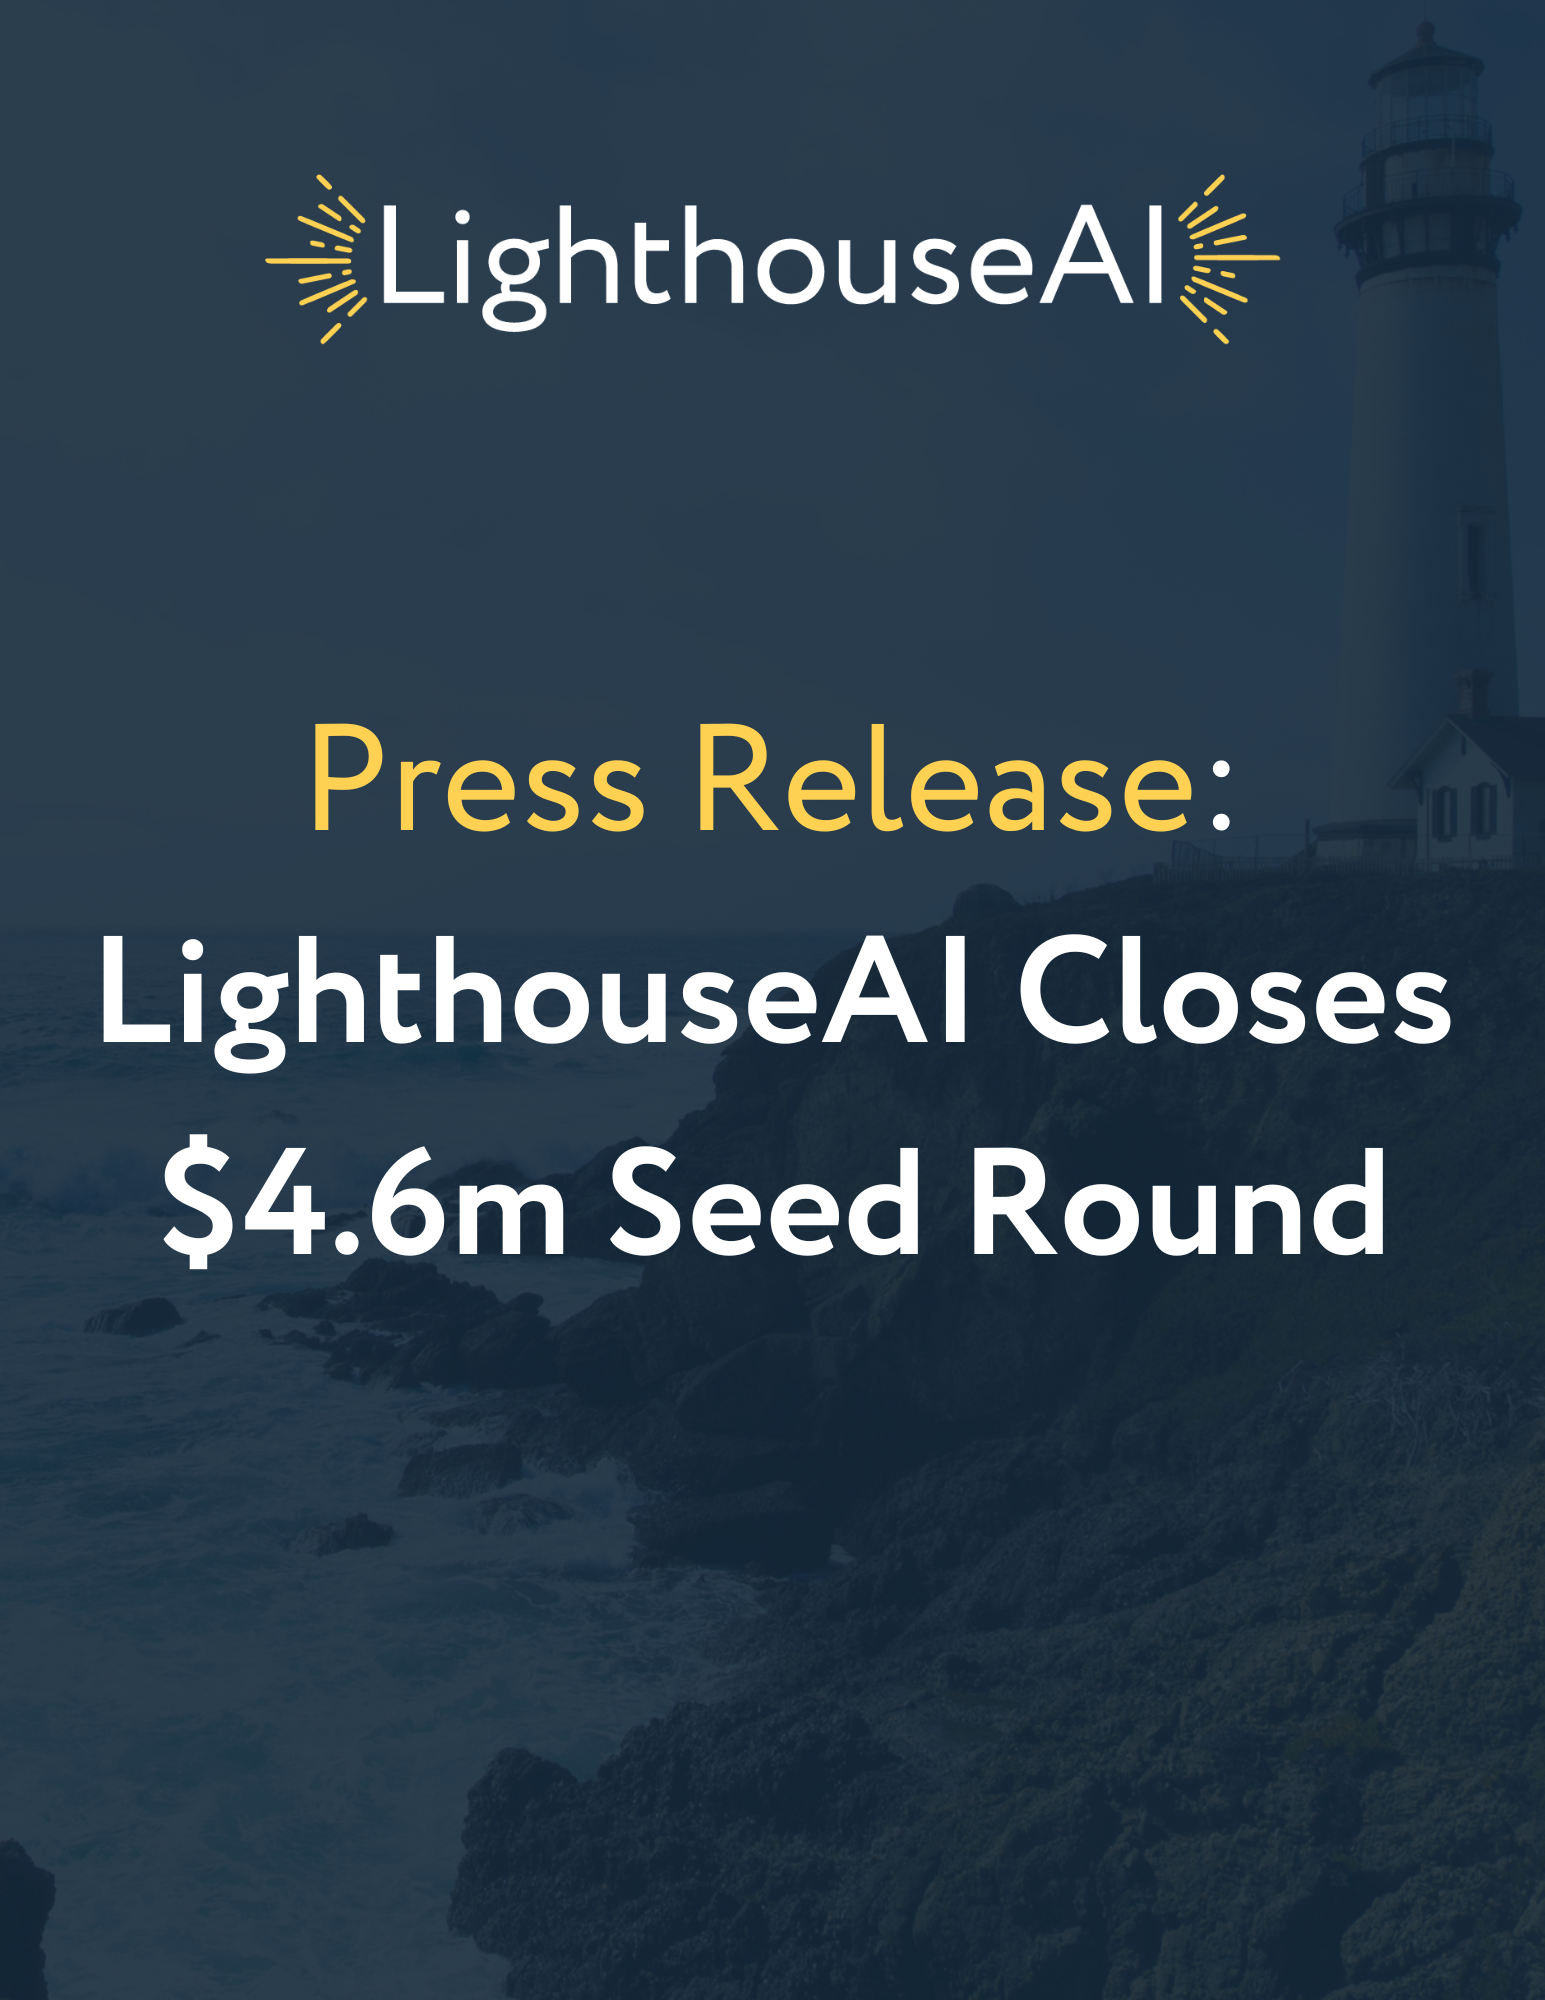 LighthouseAI Closes $4.6m Seed Round